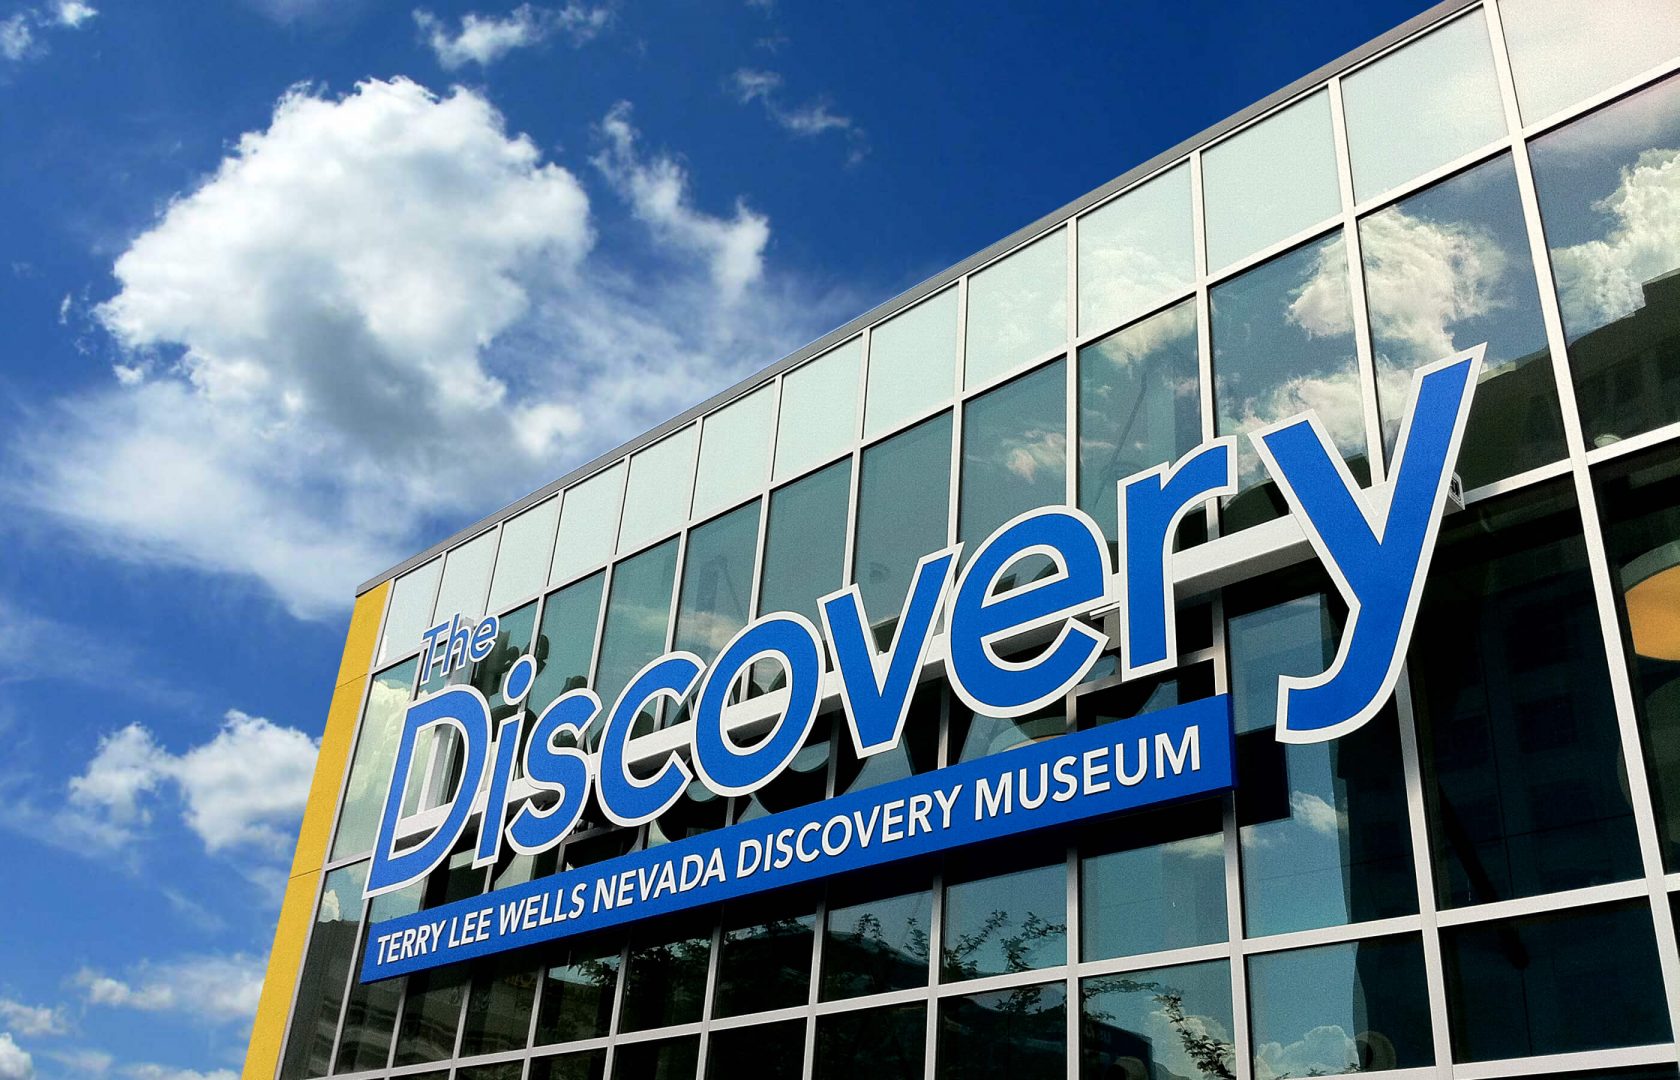 The discovery building